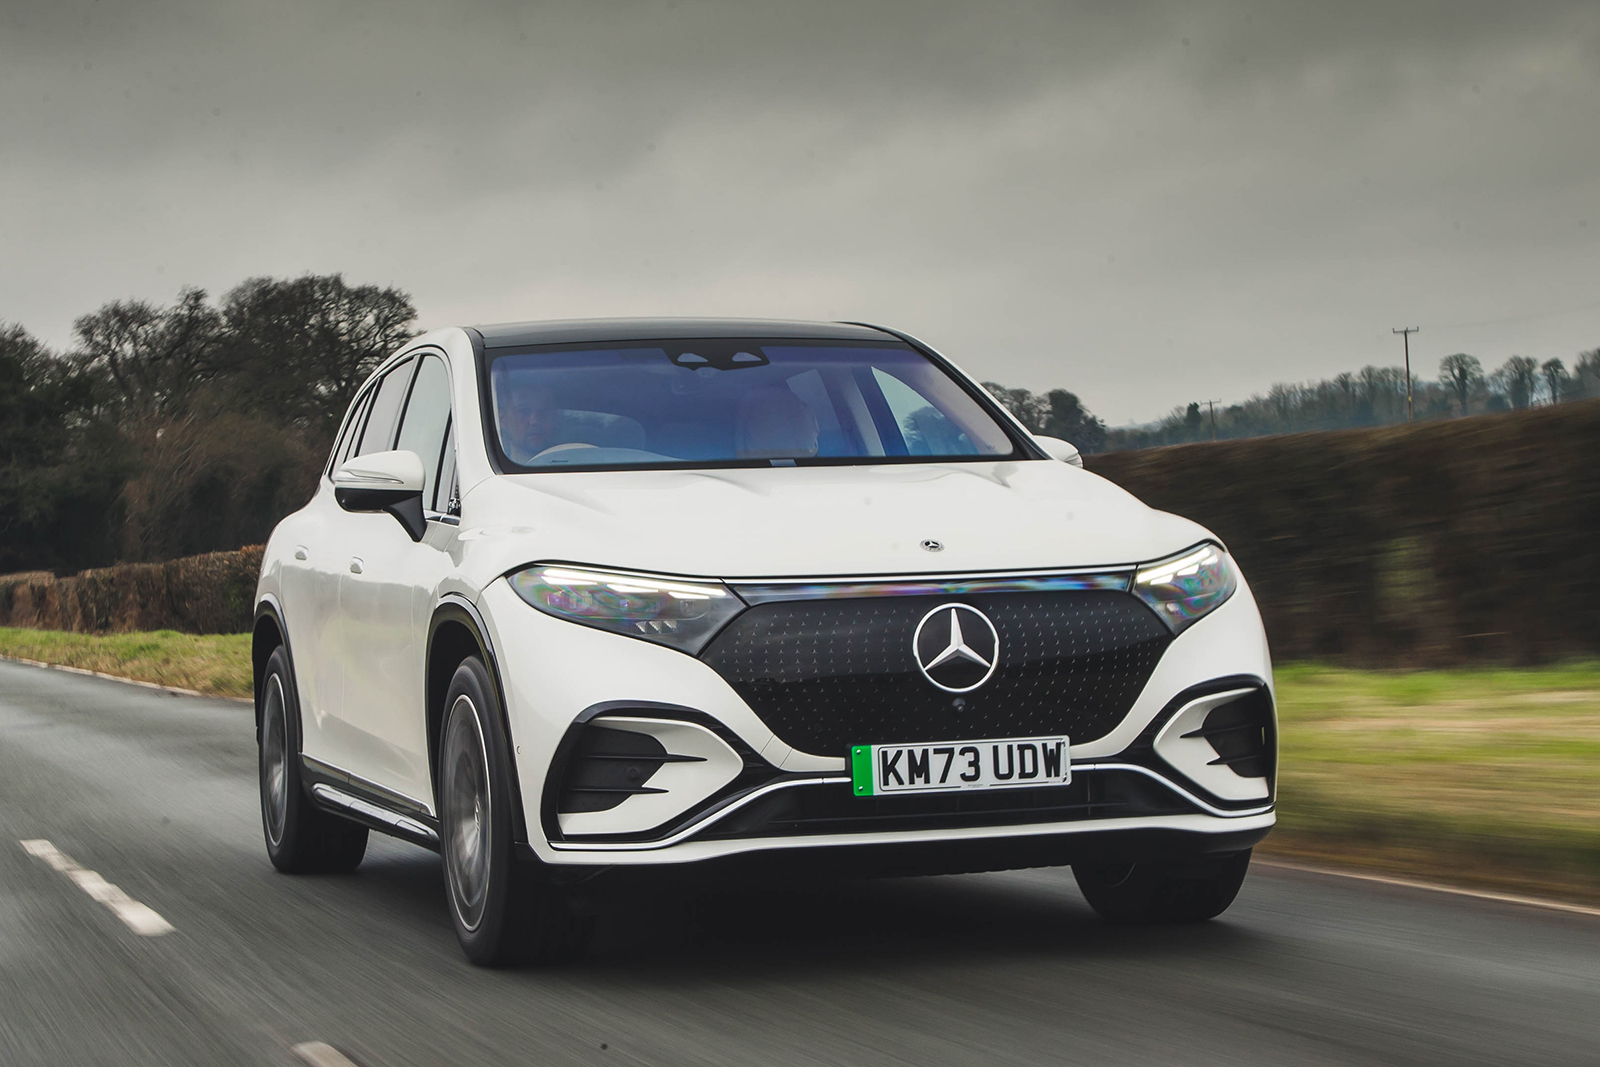 https://www.autocar.co.uk/Best%20electric%20cars%20for%20towing%20Mercedes%20EQS%20SUV